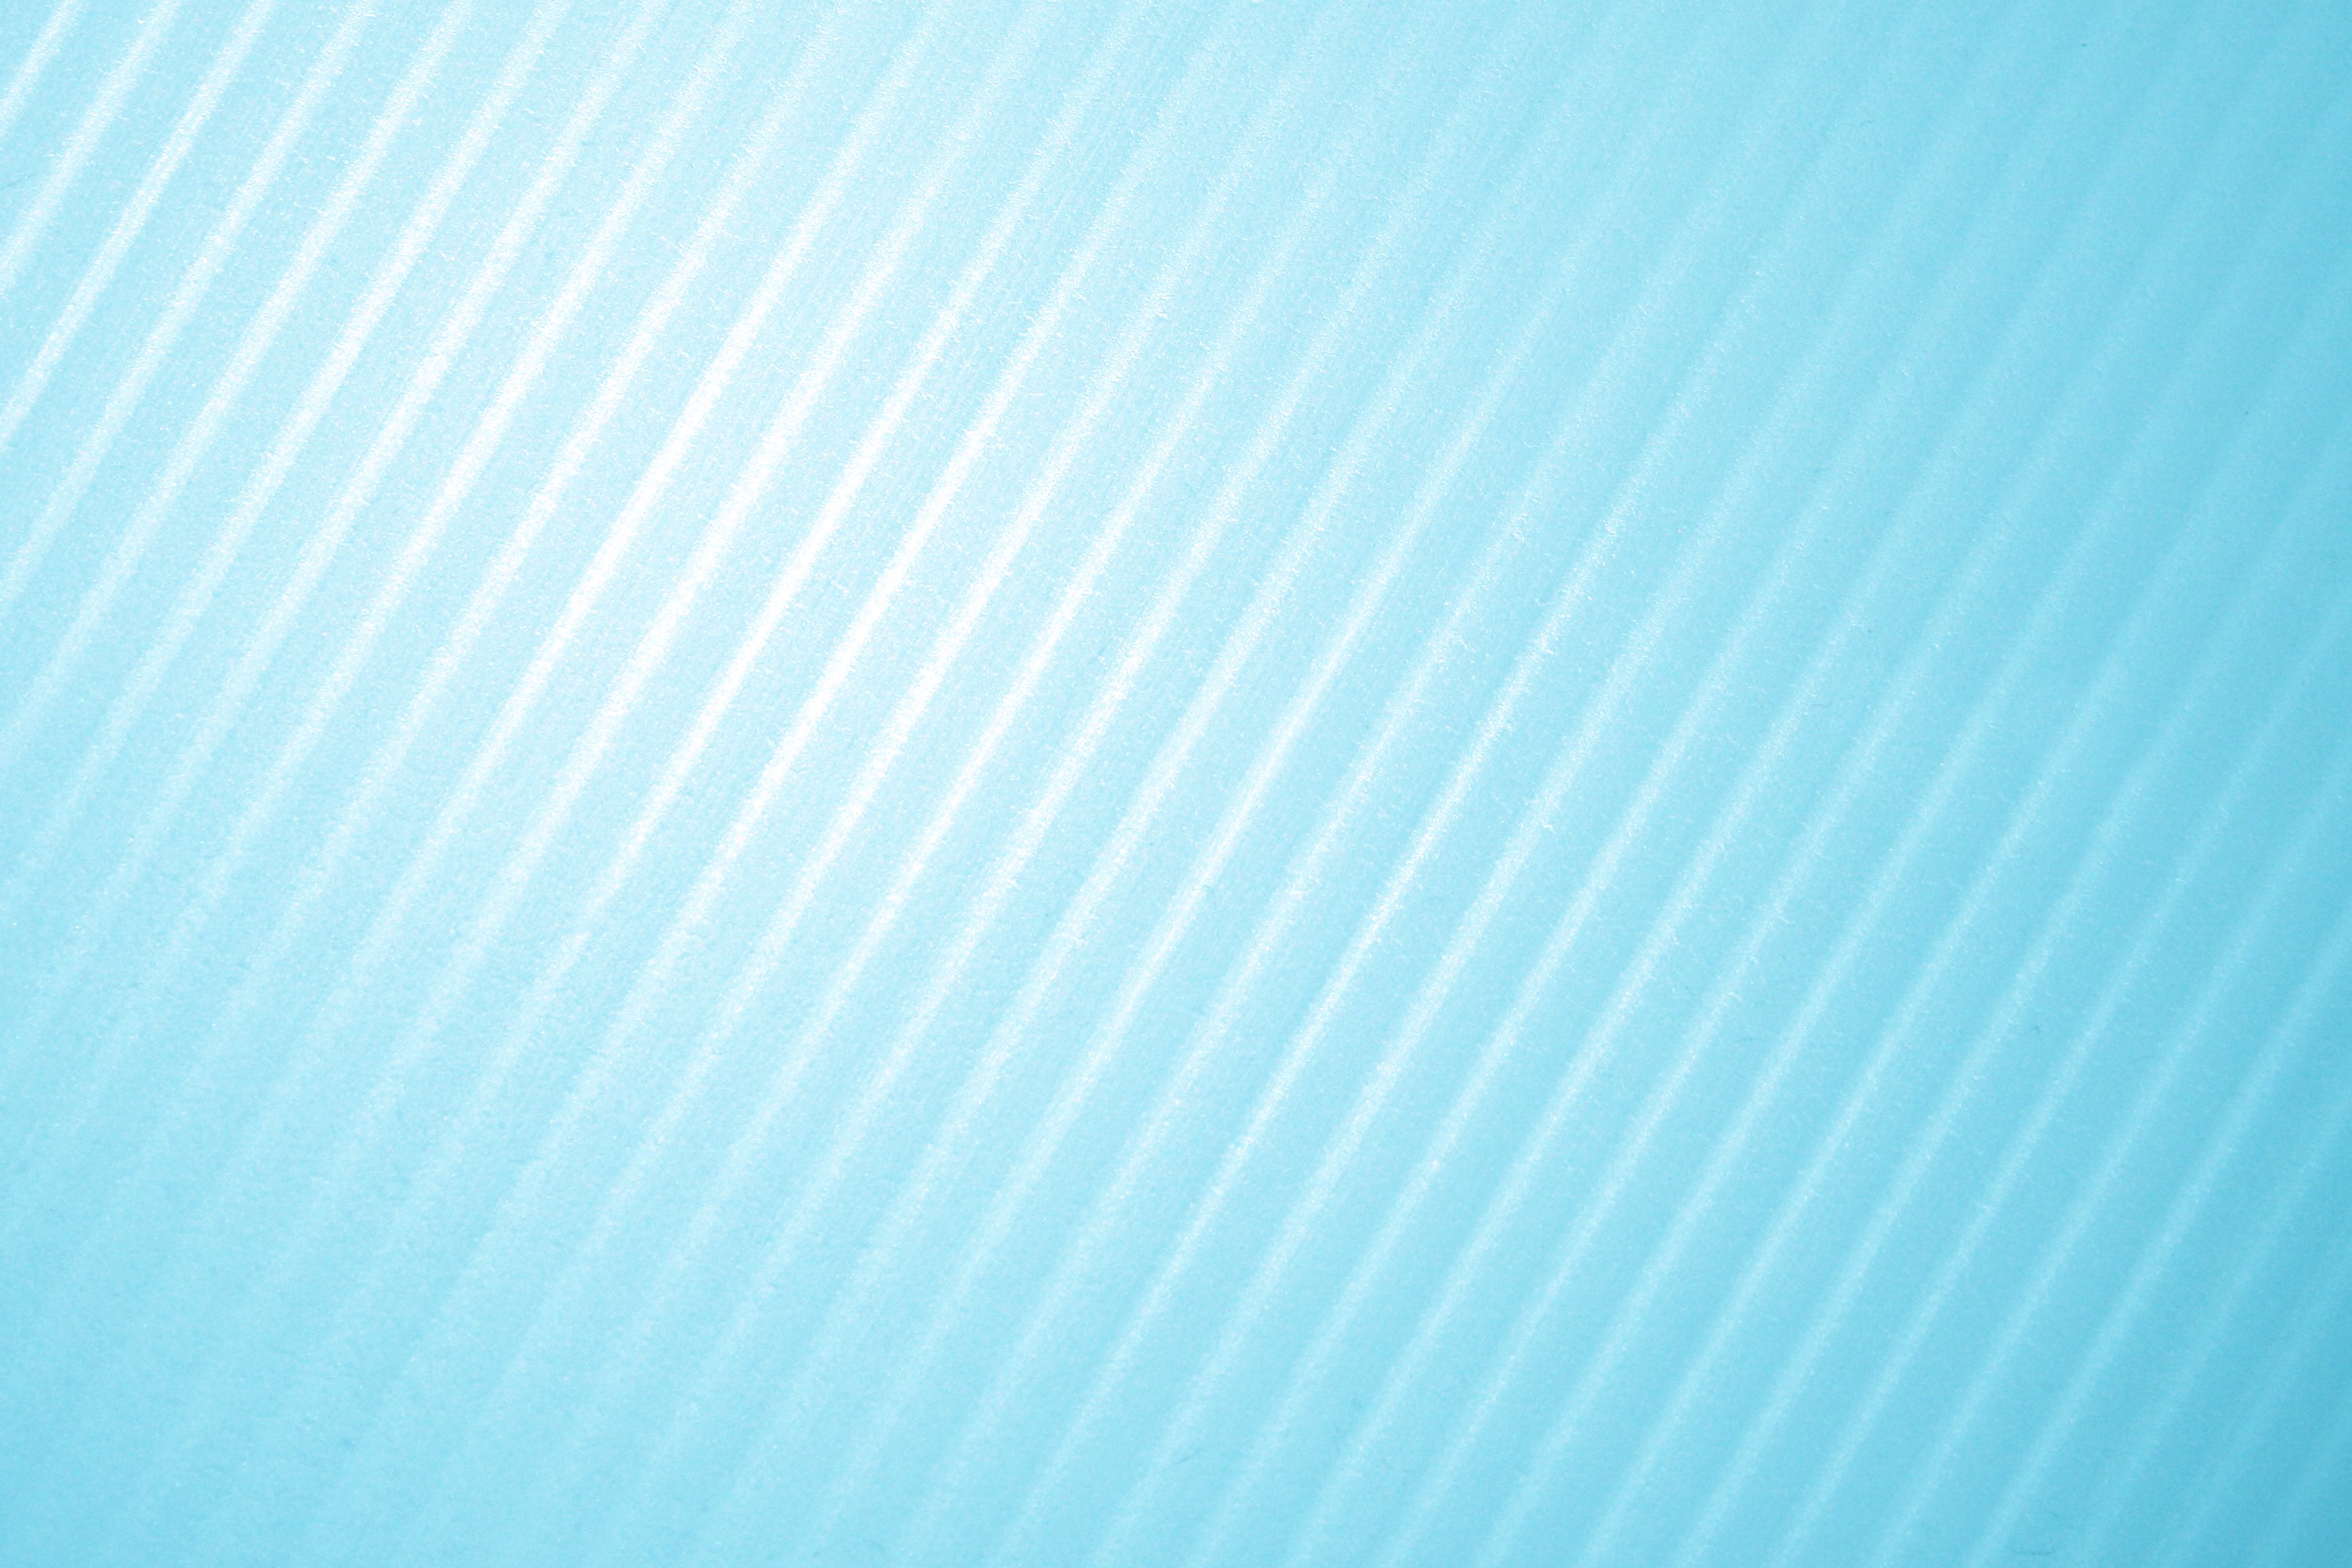 Baby Blue Background Stripes Baby blue diagonal striped